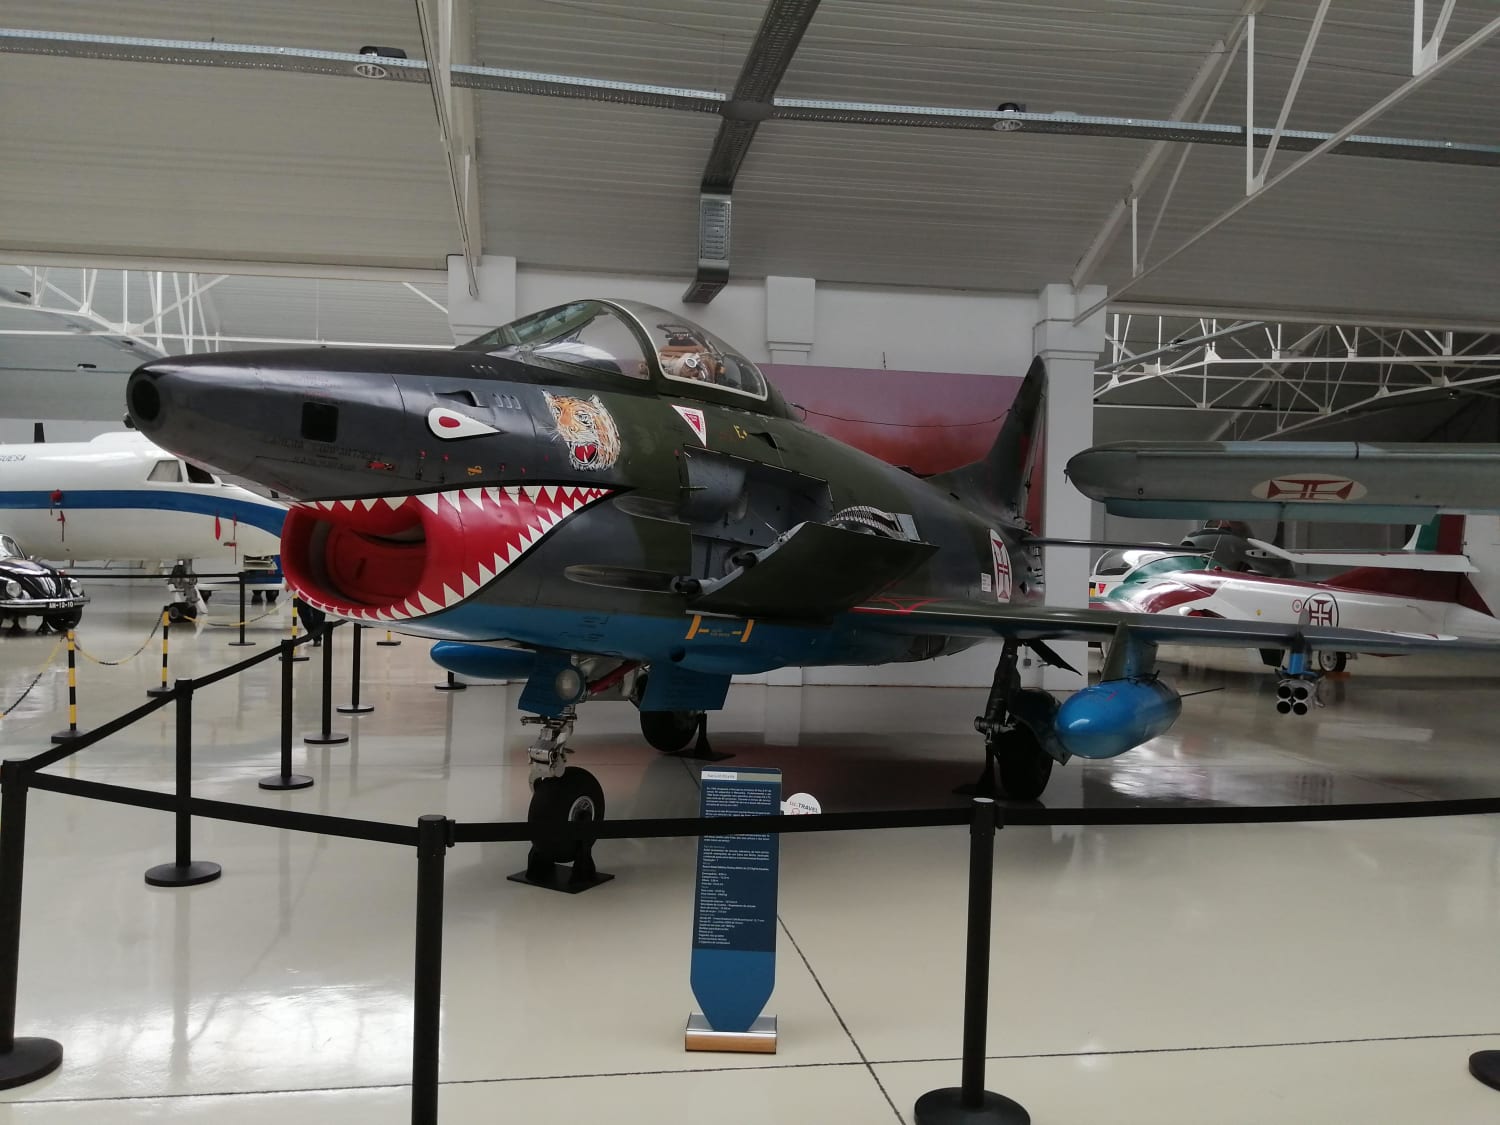 G-91 r/4 I found in the Portuguese Air museum. He likes to eat air it seems.